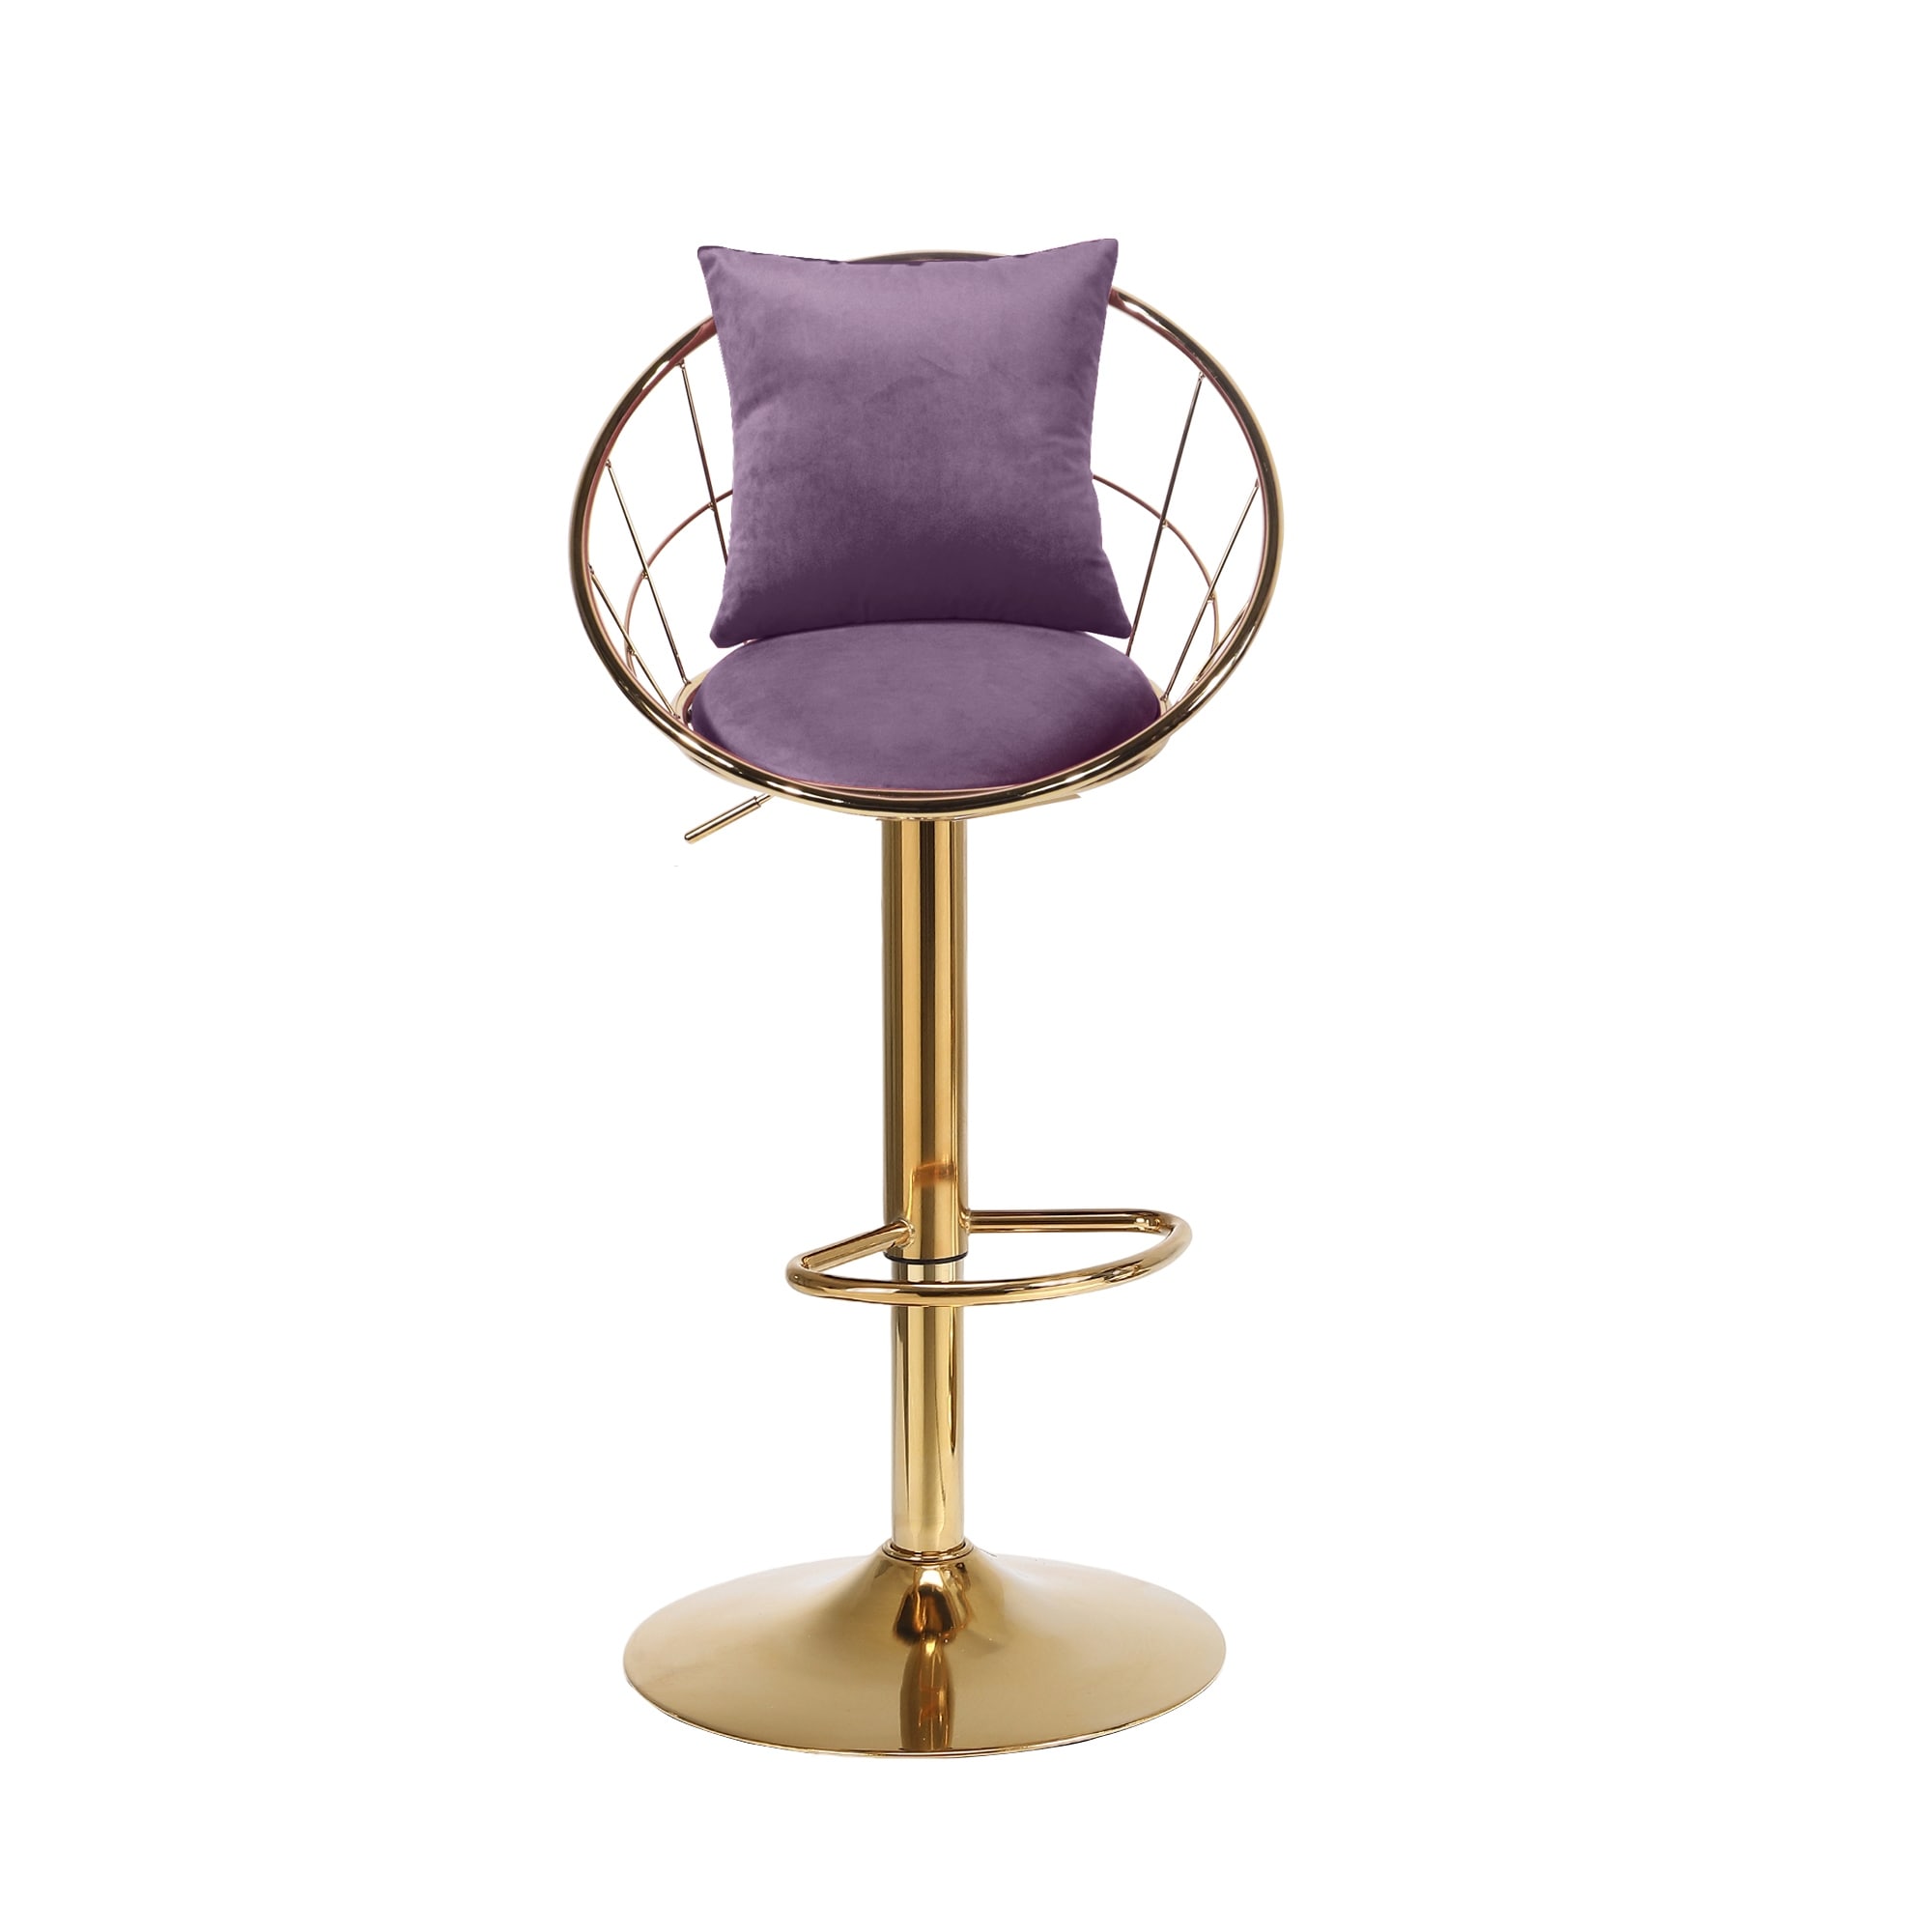 2 Velvet bar chair With pure gold plated, 360 degree rotation, adjustable height - N/A